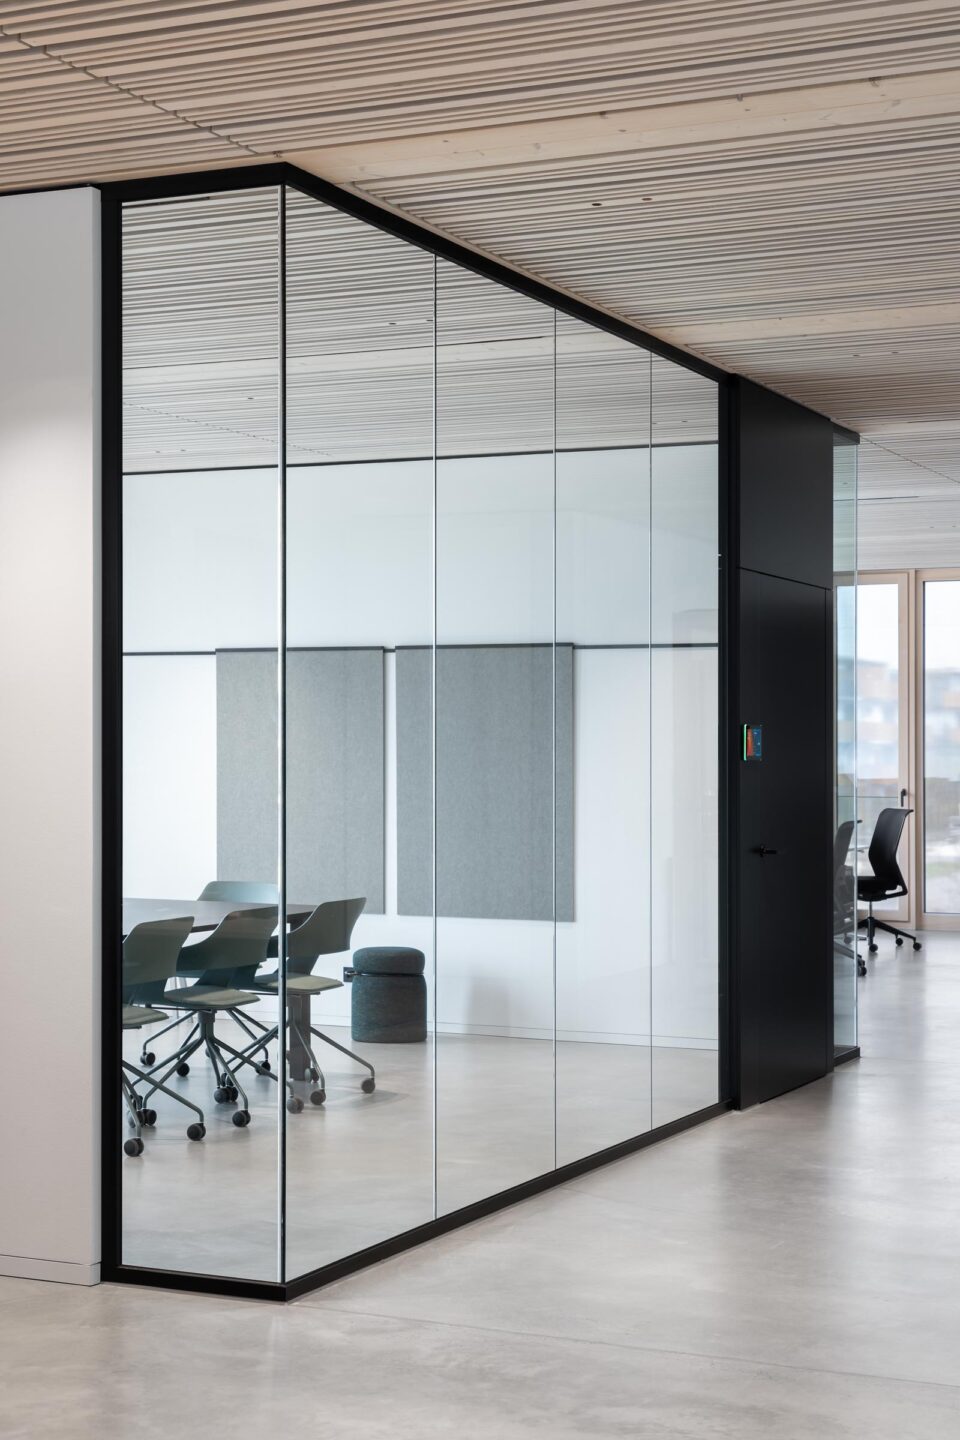 Nething Architects | conference room behind glass wall